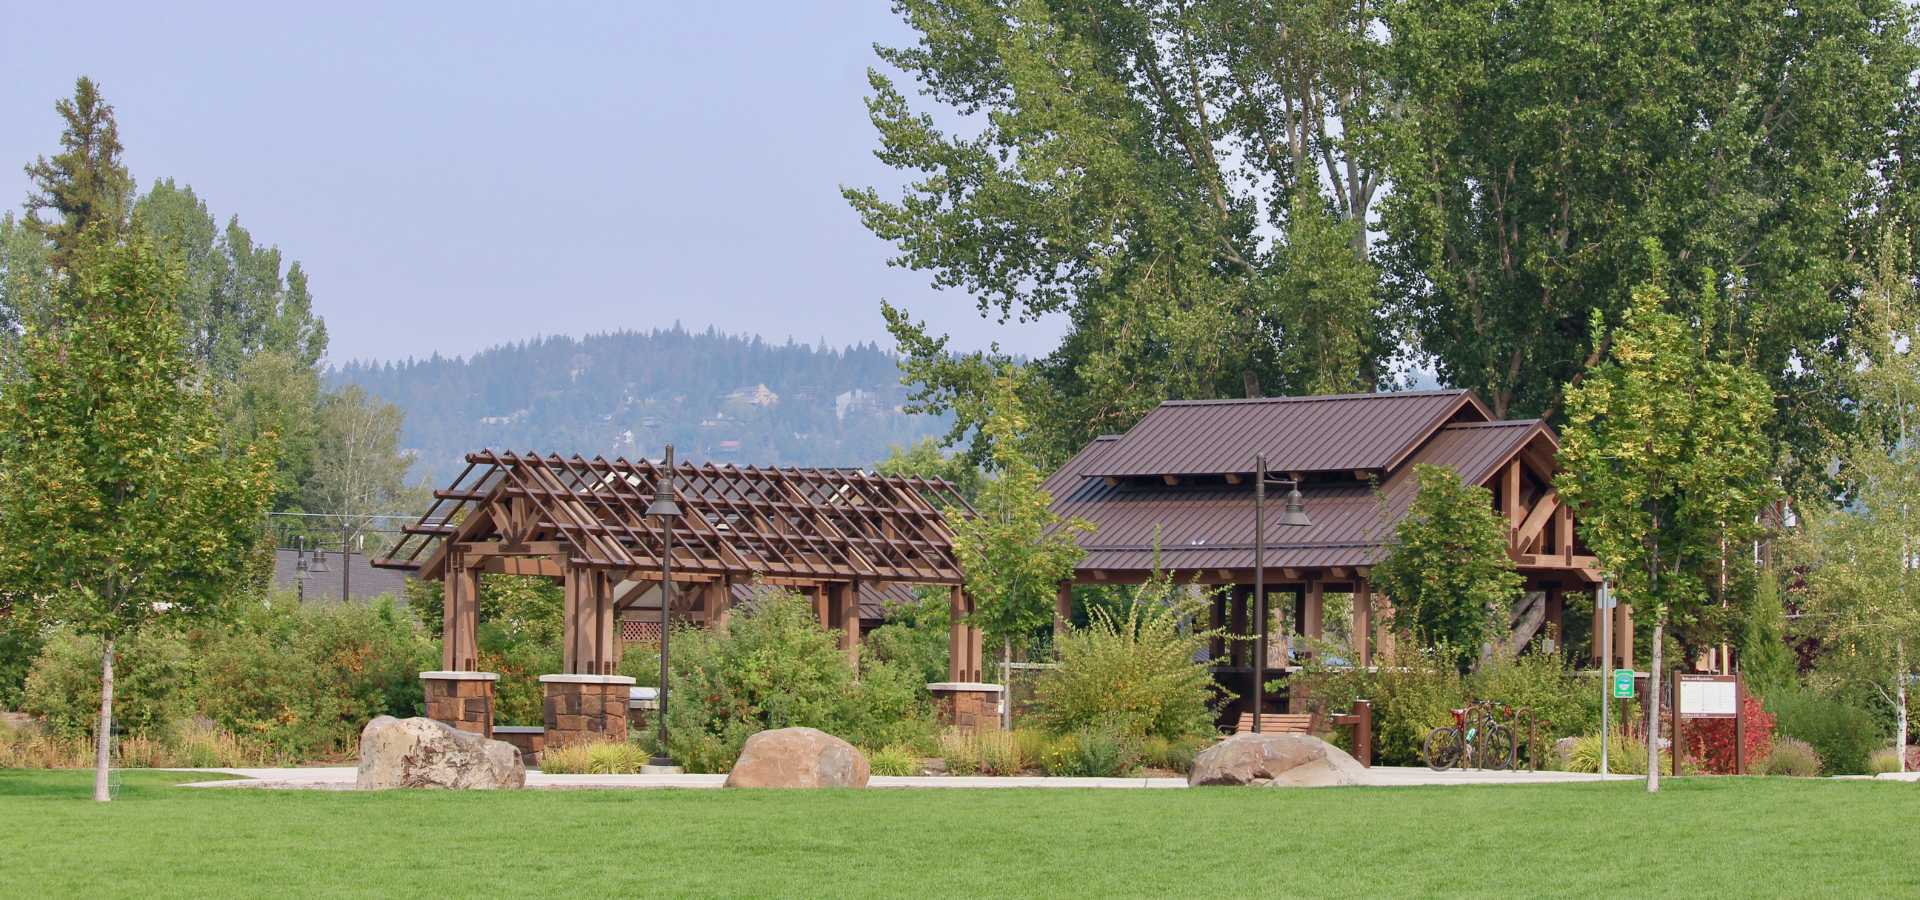 picnic shelters at Miller's Landing park with mountain in abckground